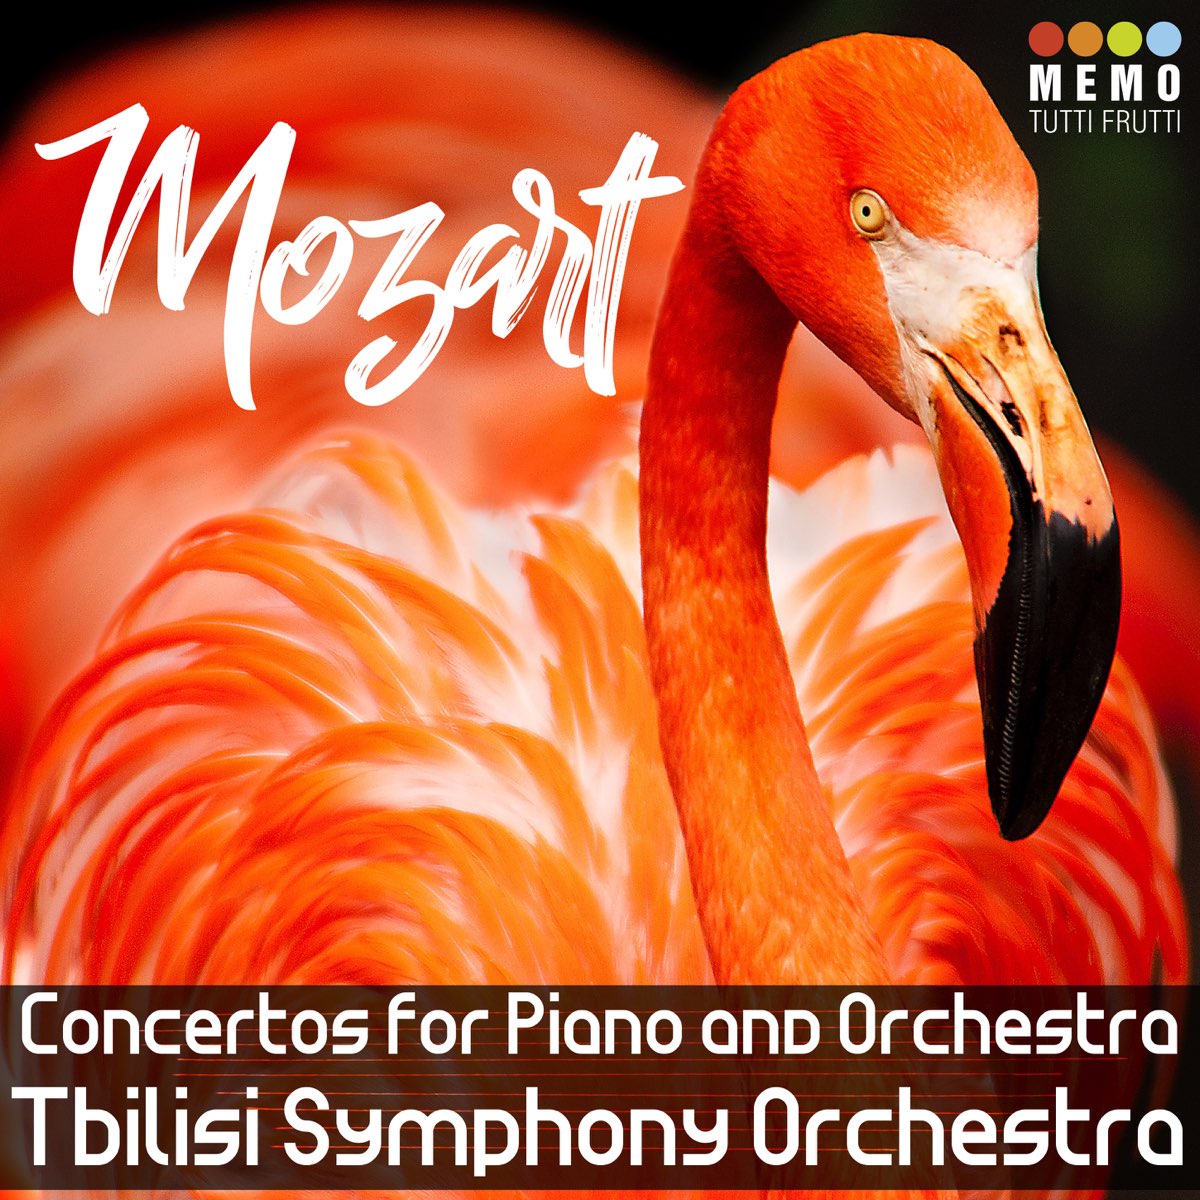 Mozart: Concertos for Piano and Orchestra by Tbilisi Symphony Orchestra on  Apple Music